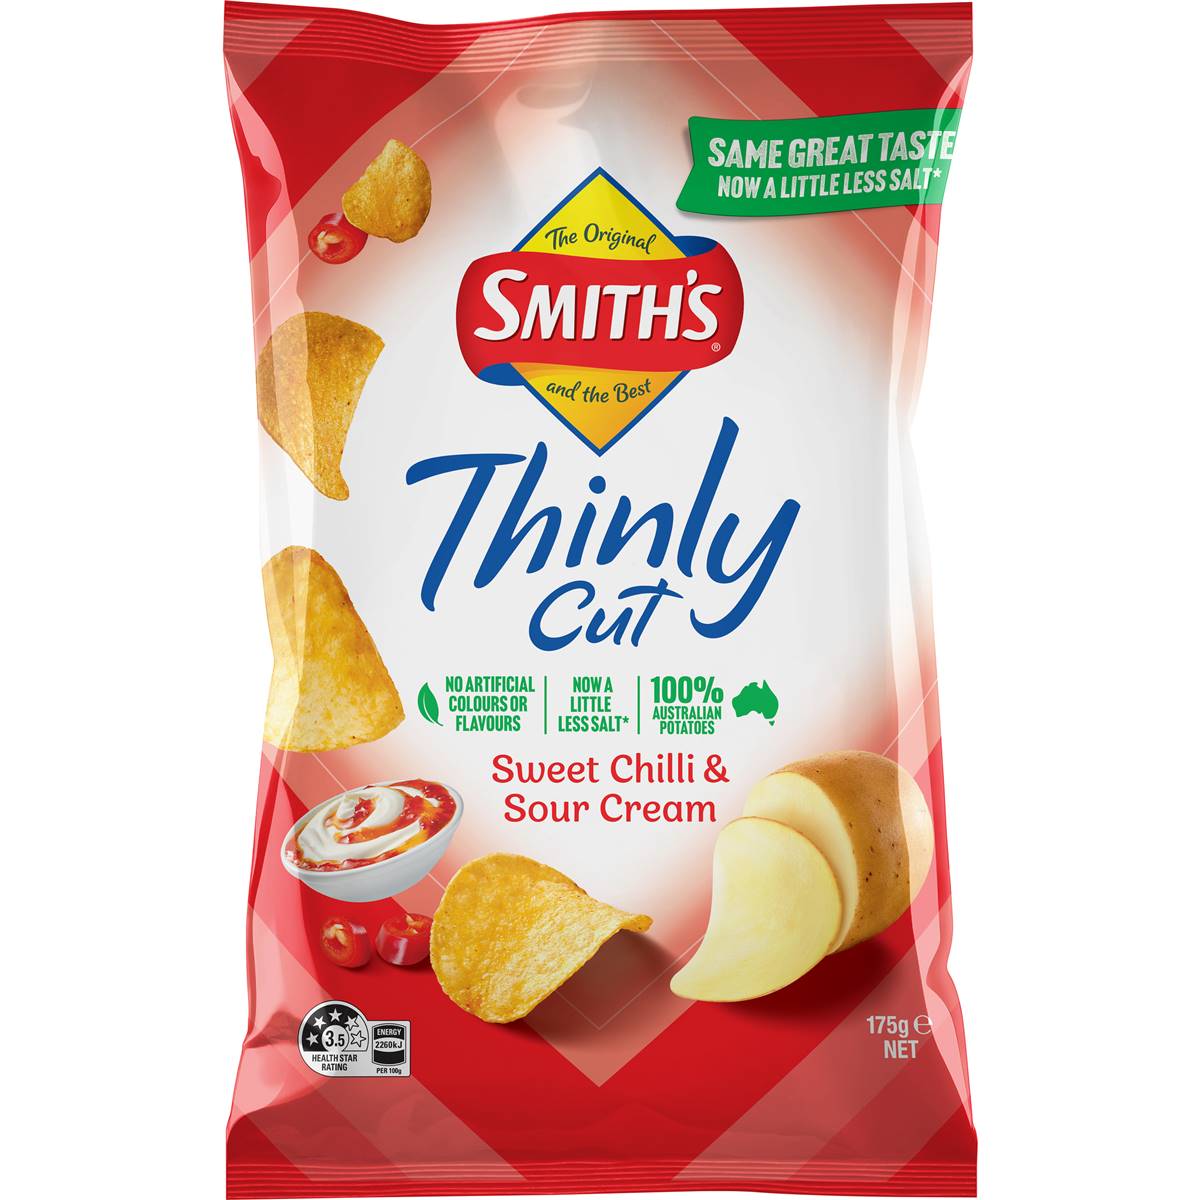 Calories in Smith's Thinly Cut Chips Sweet Chilli Sour Cream